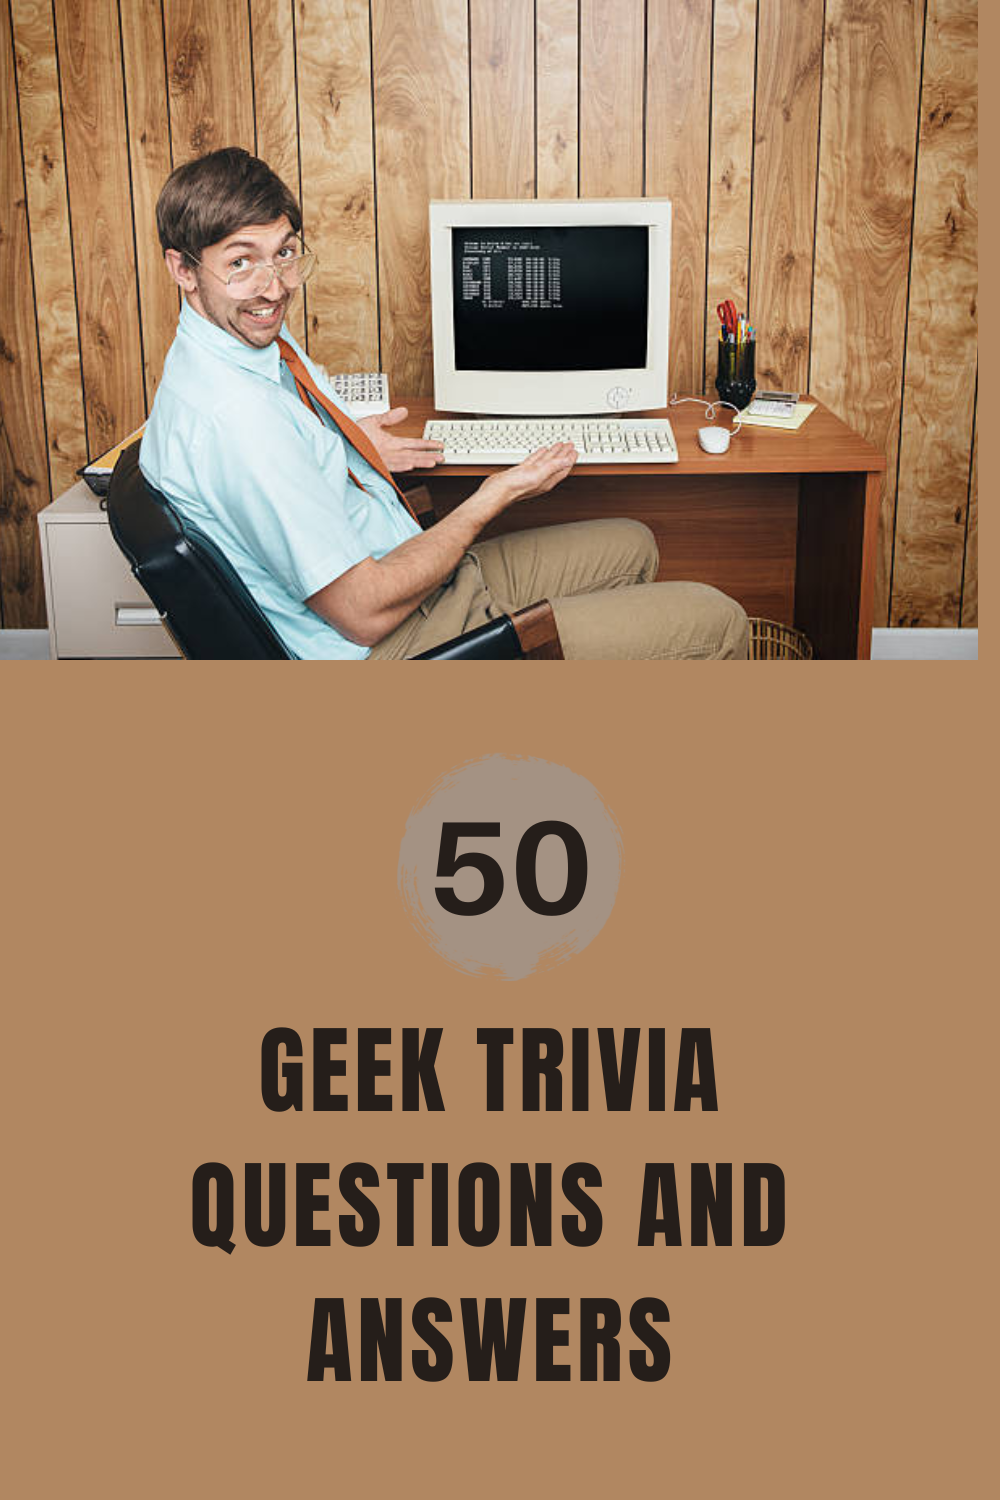 50 Geek Trivia Questions and Answers